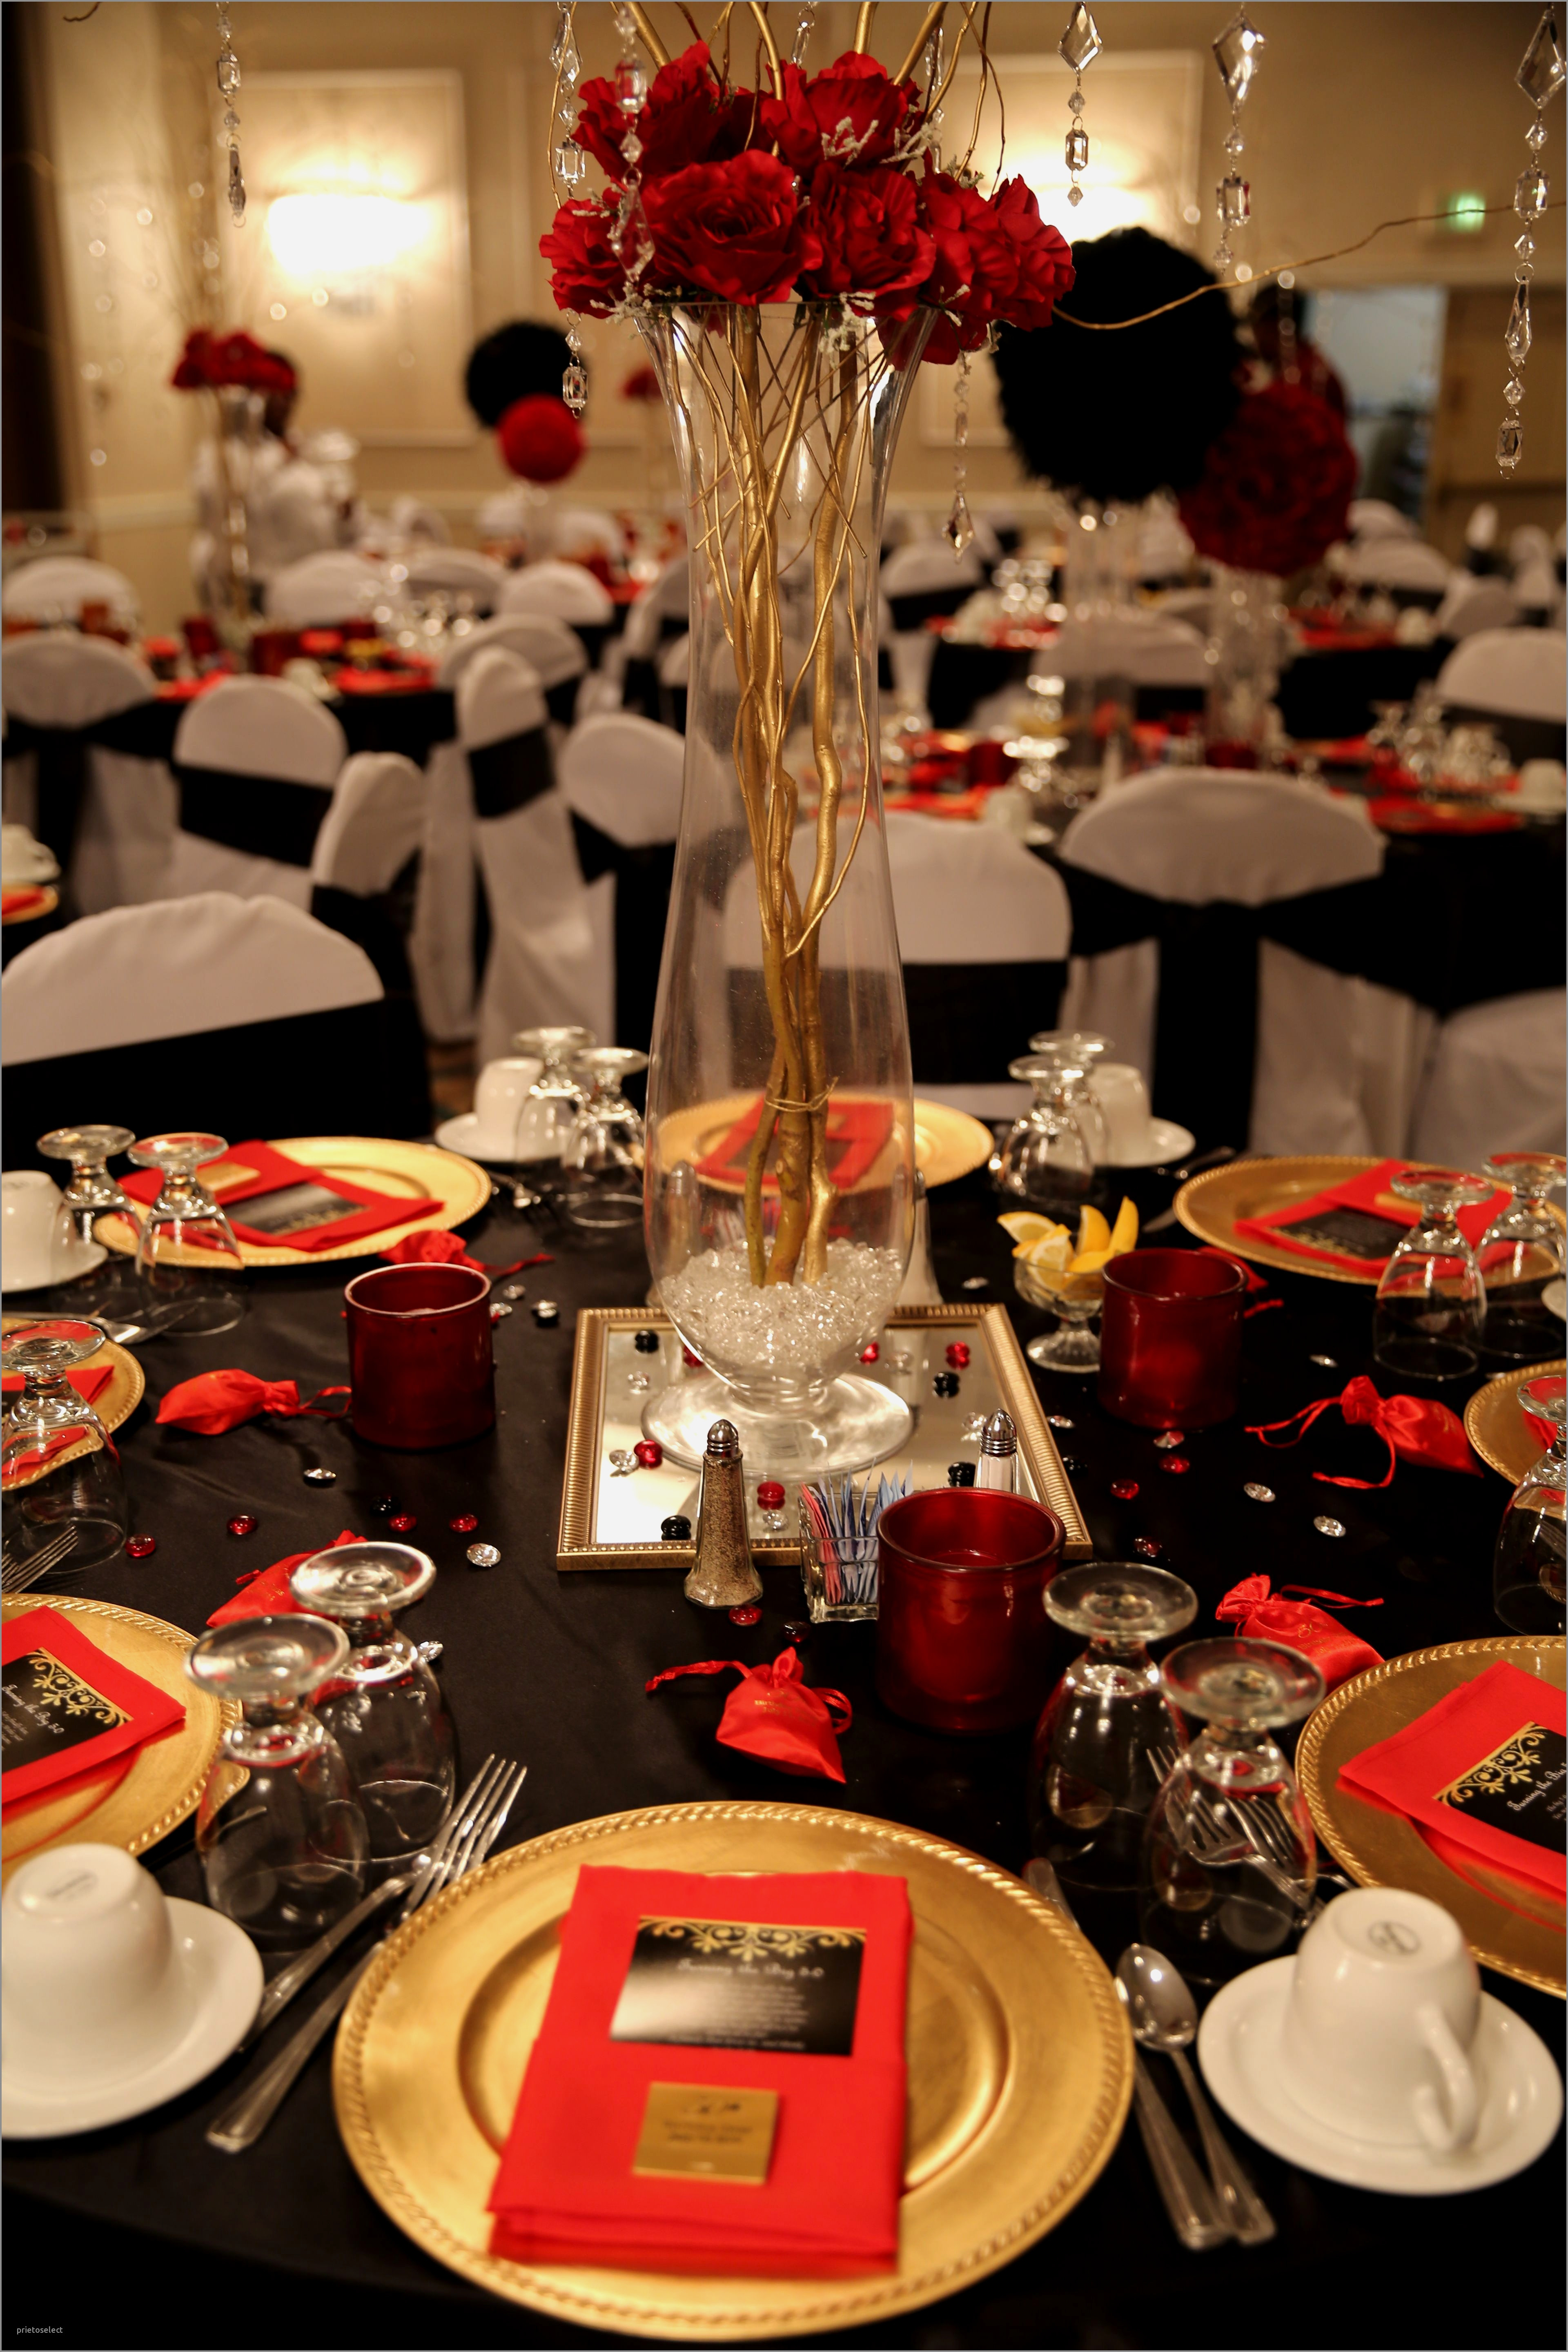 29 Ideal Black Glass Vases Centerpieces 2022 free download black glass vases centerpieces of 75th birthday table decorations awesome ac2a2ec286a 15 cheap and easy diy for 75th birthday table decorations best of red black and gold table decorations f